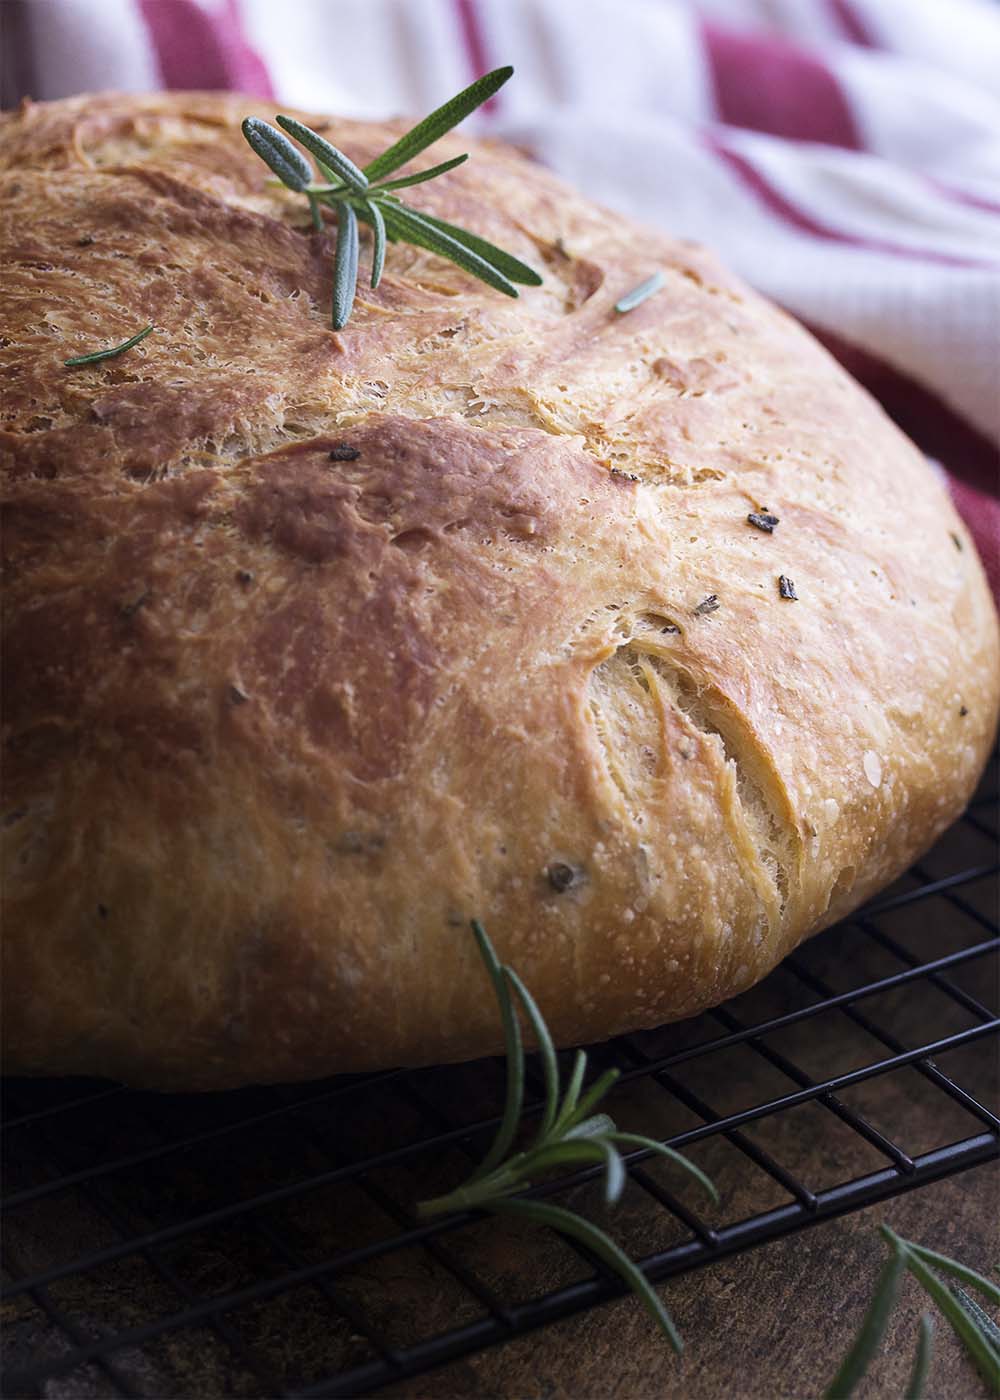 Love making artisan bread but want it to be quick and easy? This rosemary no knead bread bakes up like a dream in your dutch oven and only takes a few minutes of work. | justalittlebitofbacon.com